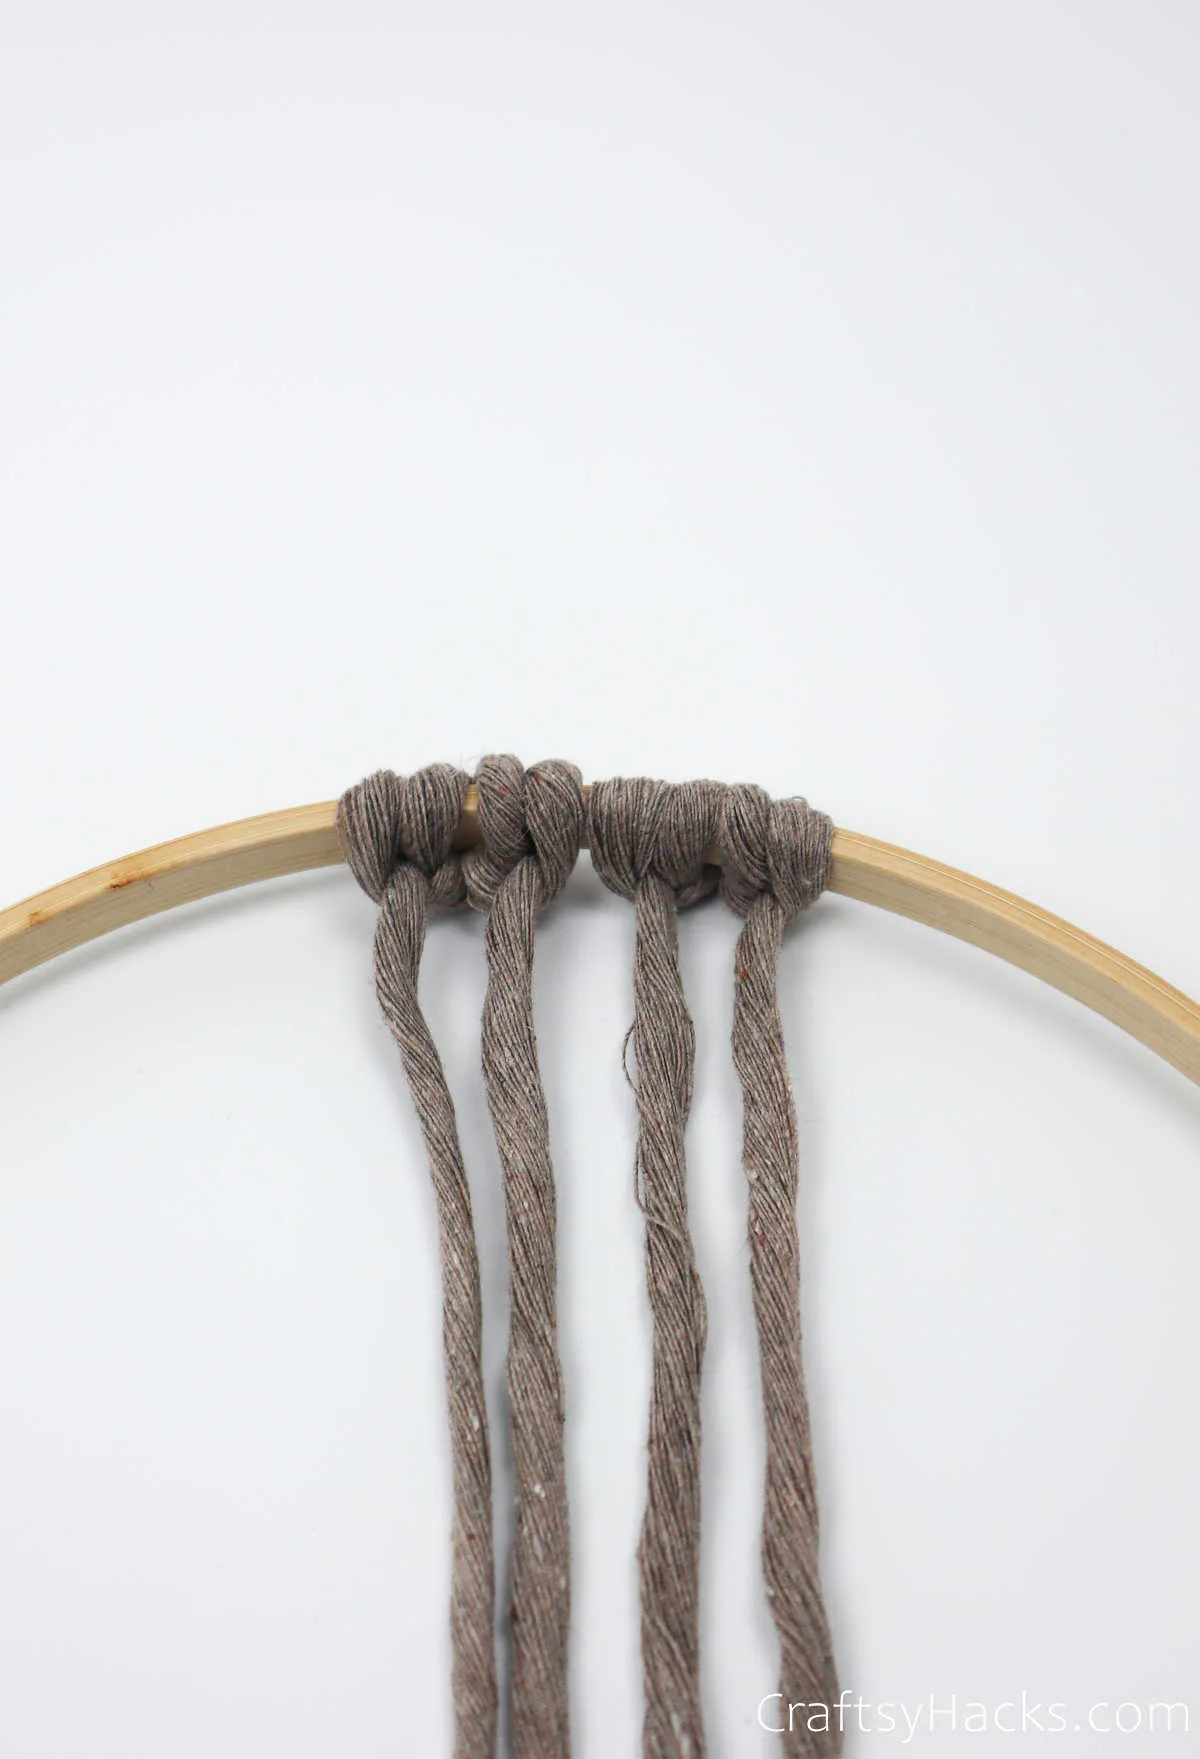 tying two more loops of string